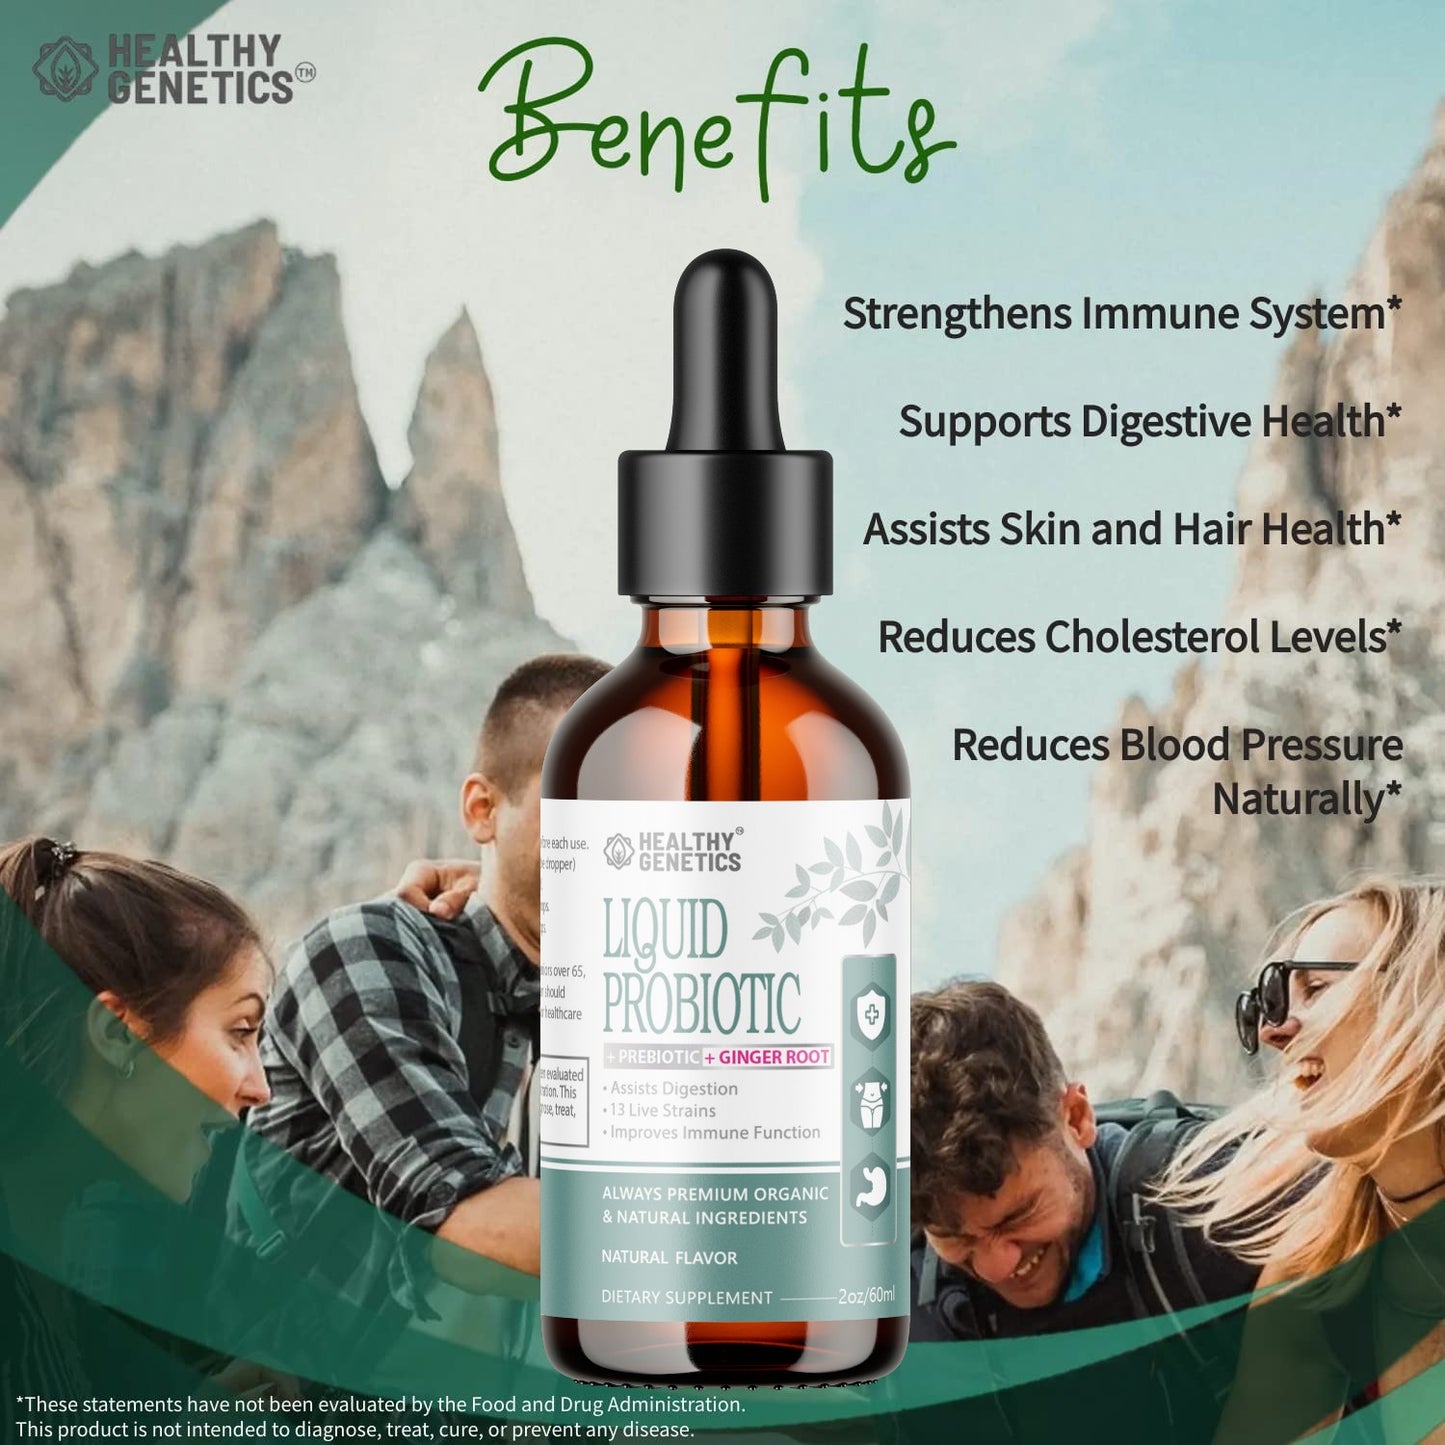 Organic Liquid Probiotics - All-Natural and Plant-Based Formulation, 12 Live Strains - Assist in Digestion, Immunity Defense Booster - Ideal for Men, Women, Toddlers and Kids - 2Oz/60ml